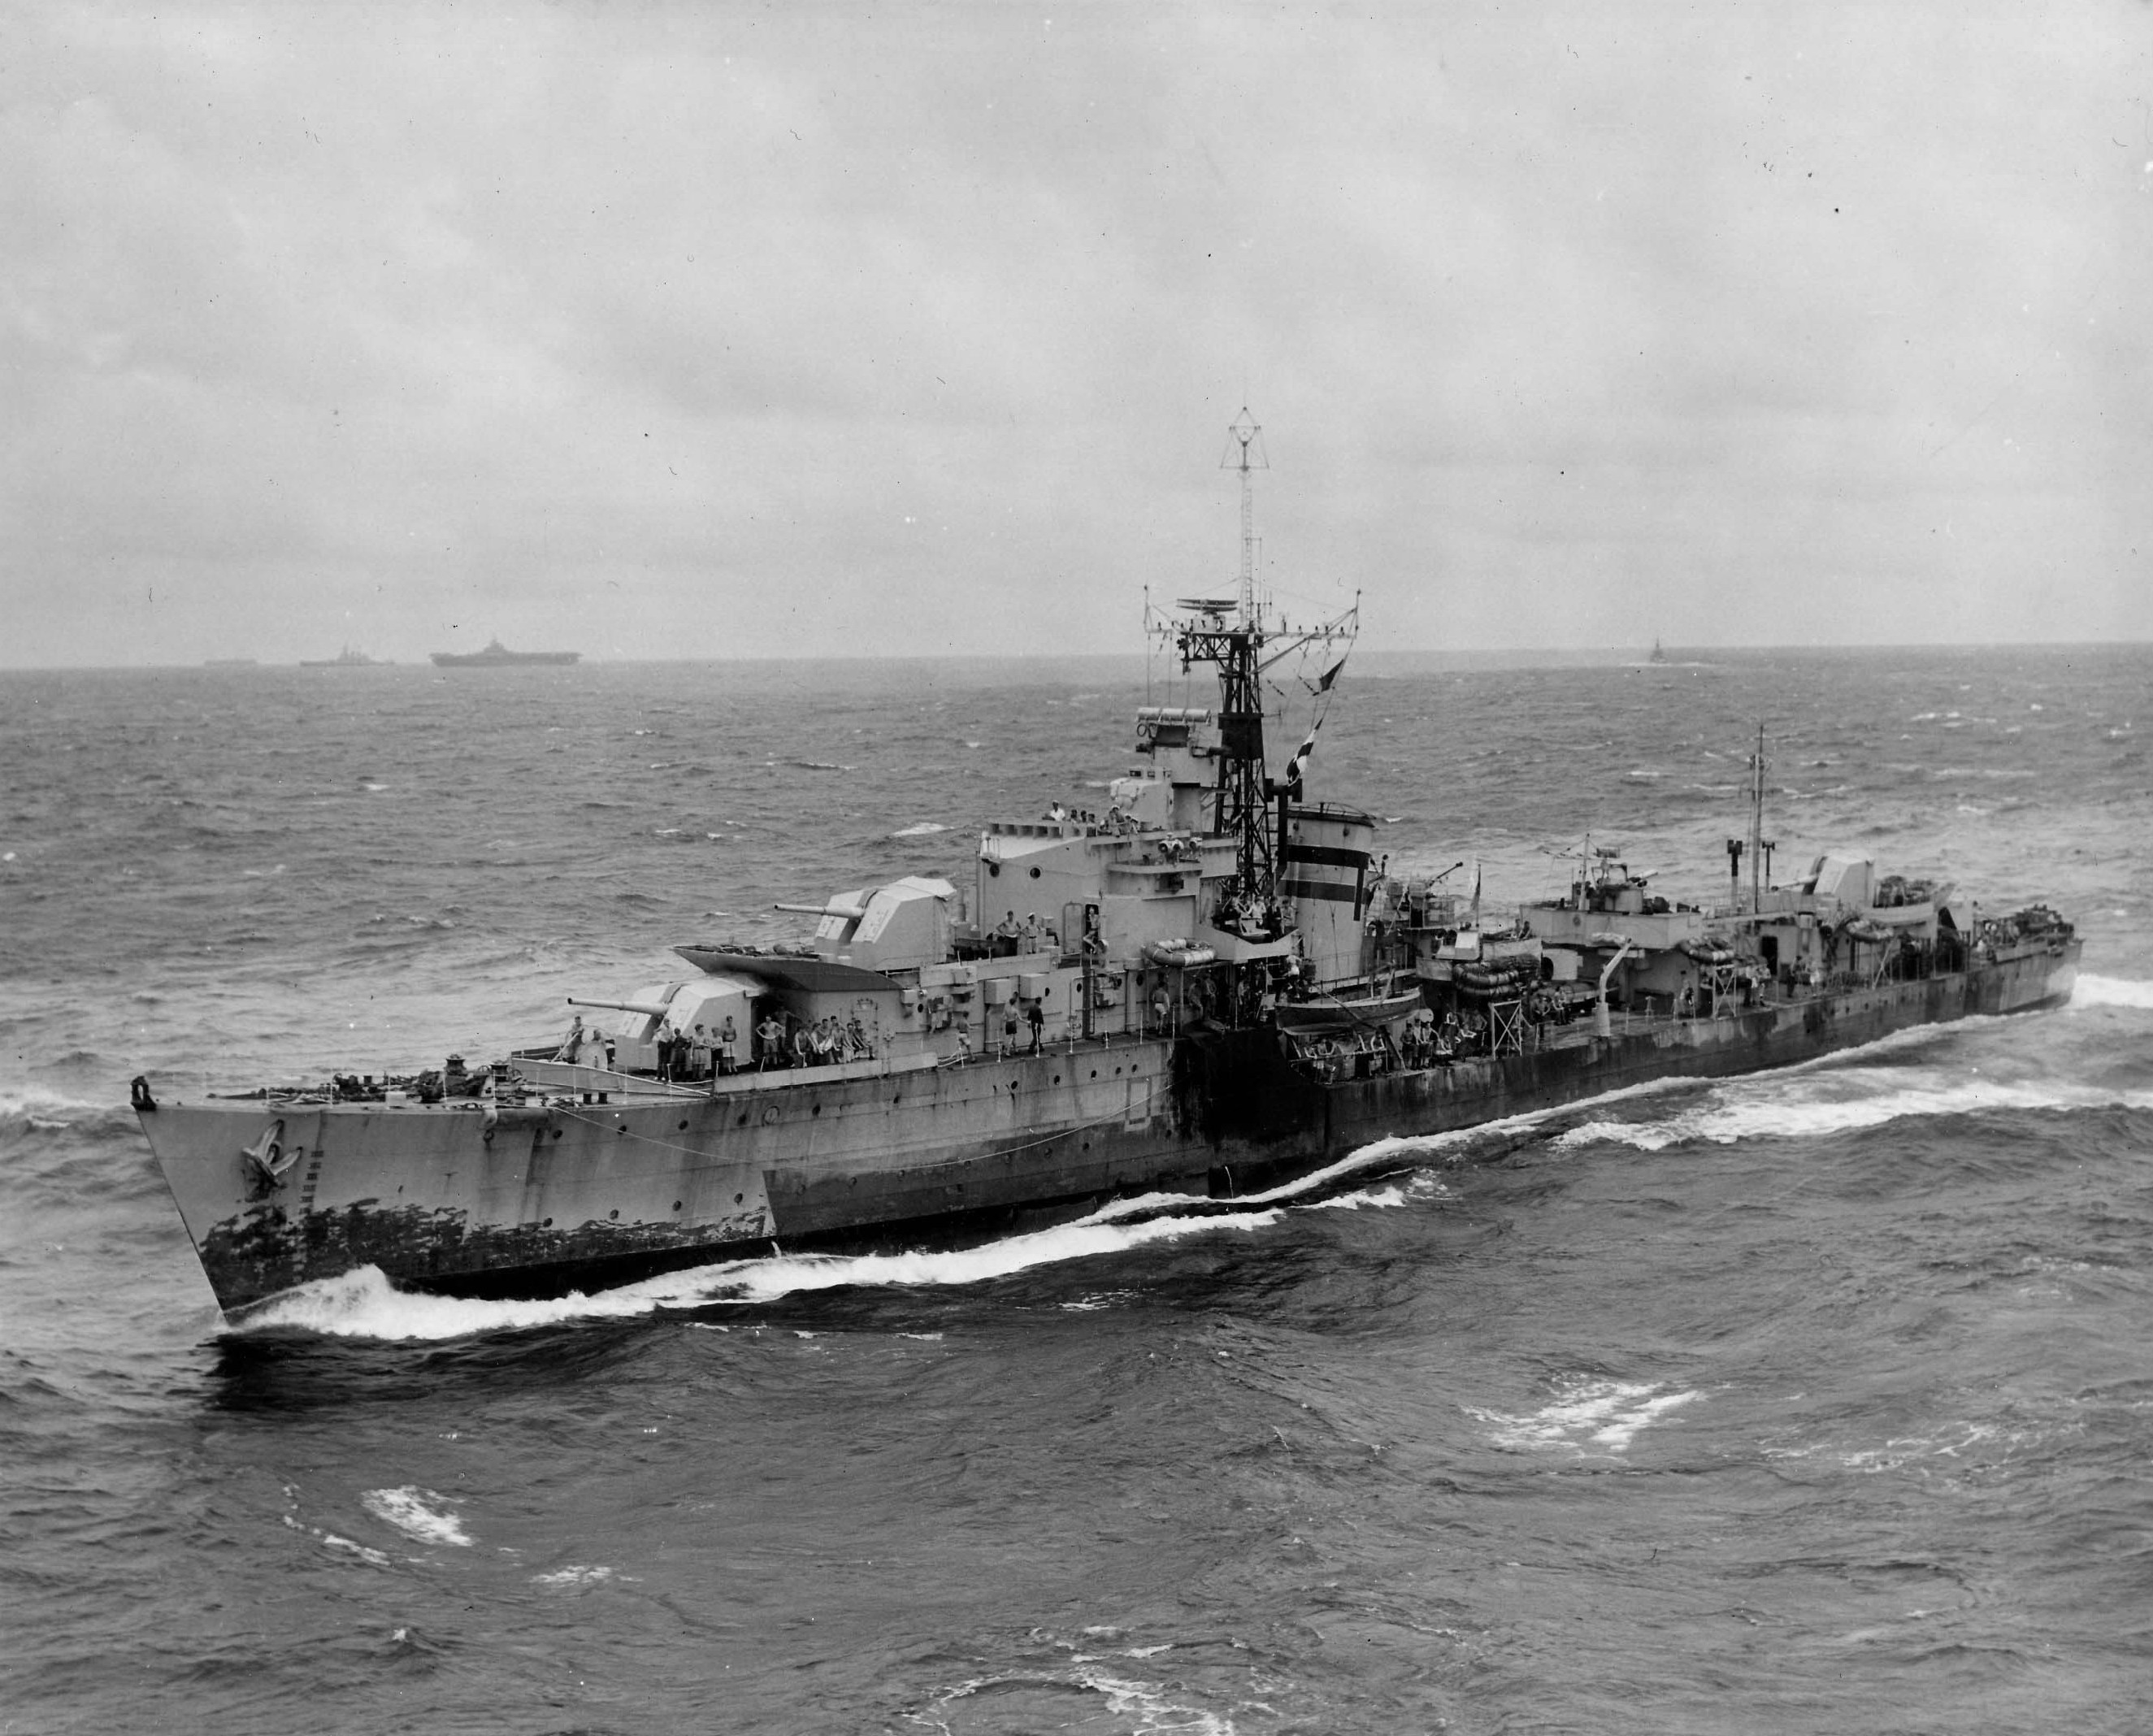 British Royal Navy T-class destroyer, probably HMS Terpsichore (D48), sailing alongside USS Wasp (Essex-class) of US Navy Task Group 38.3 off Japan Aug 1945; note USS Randolph in background